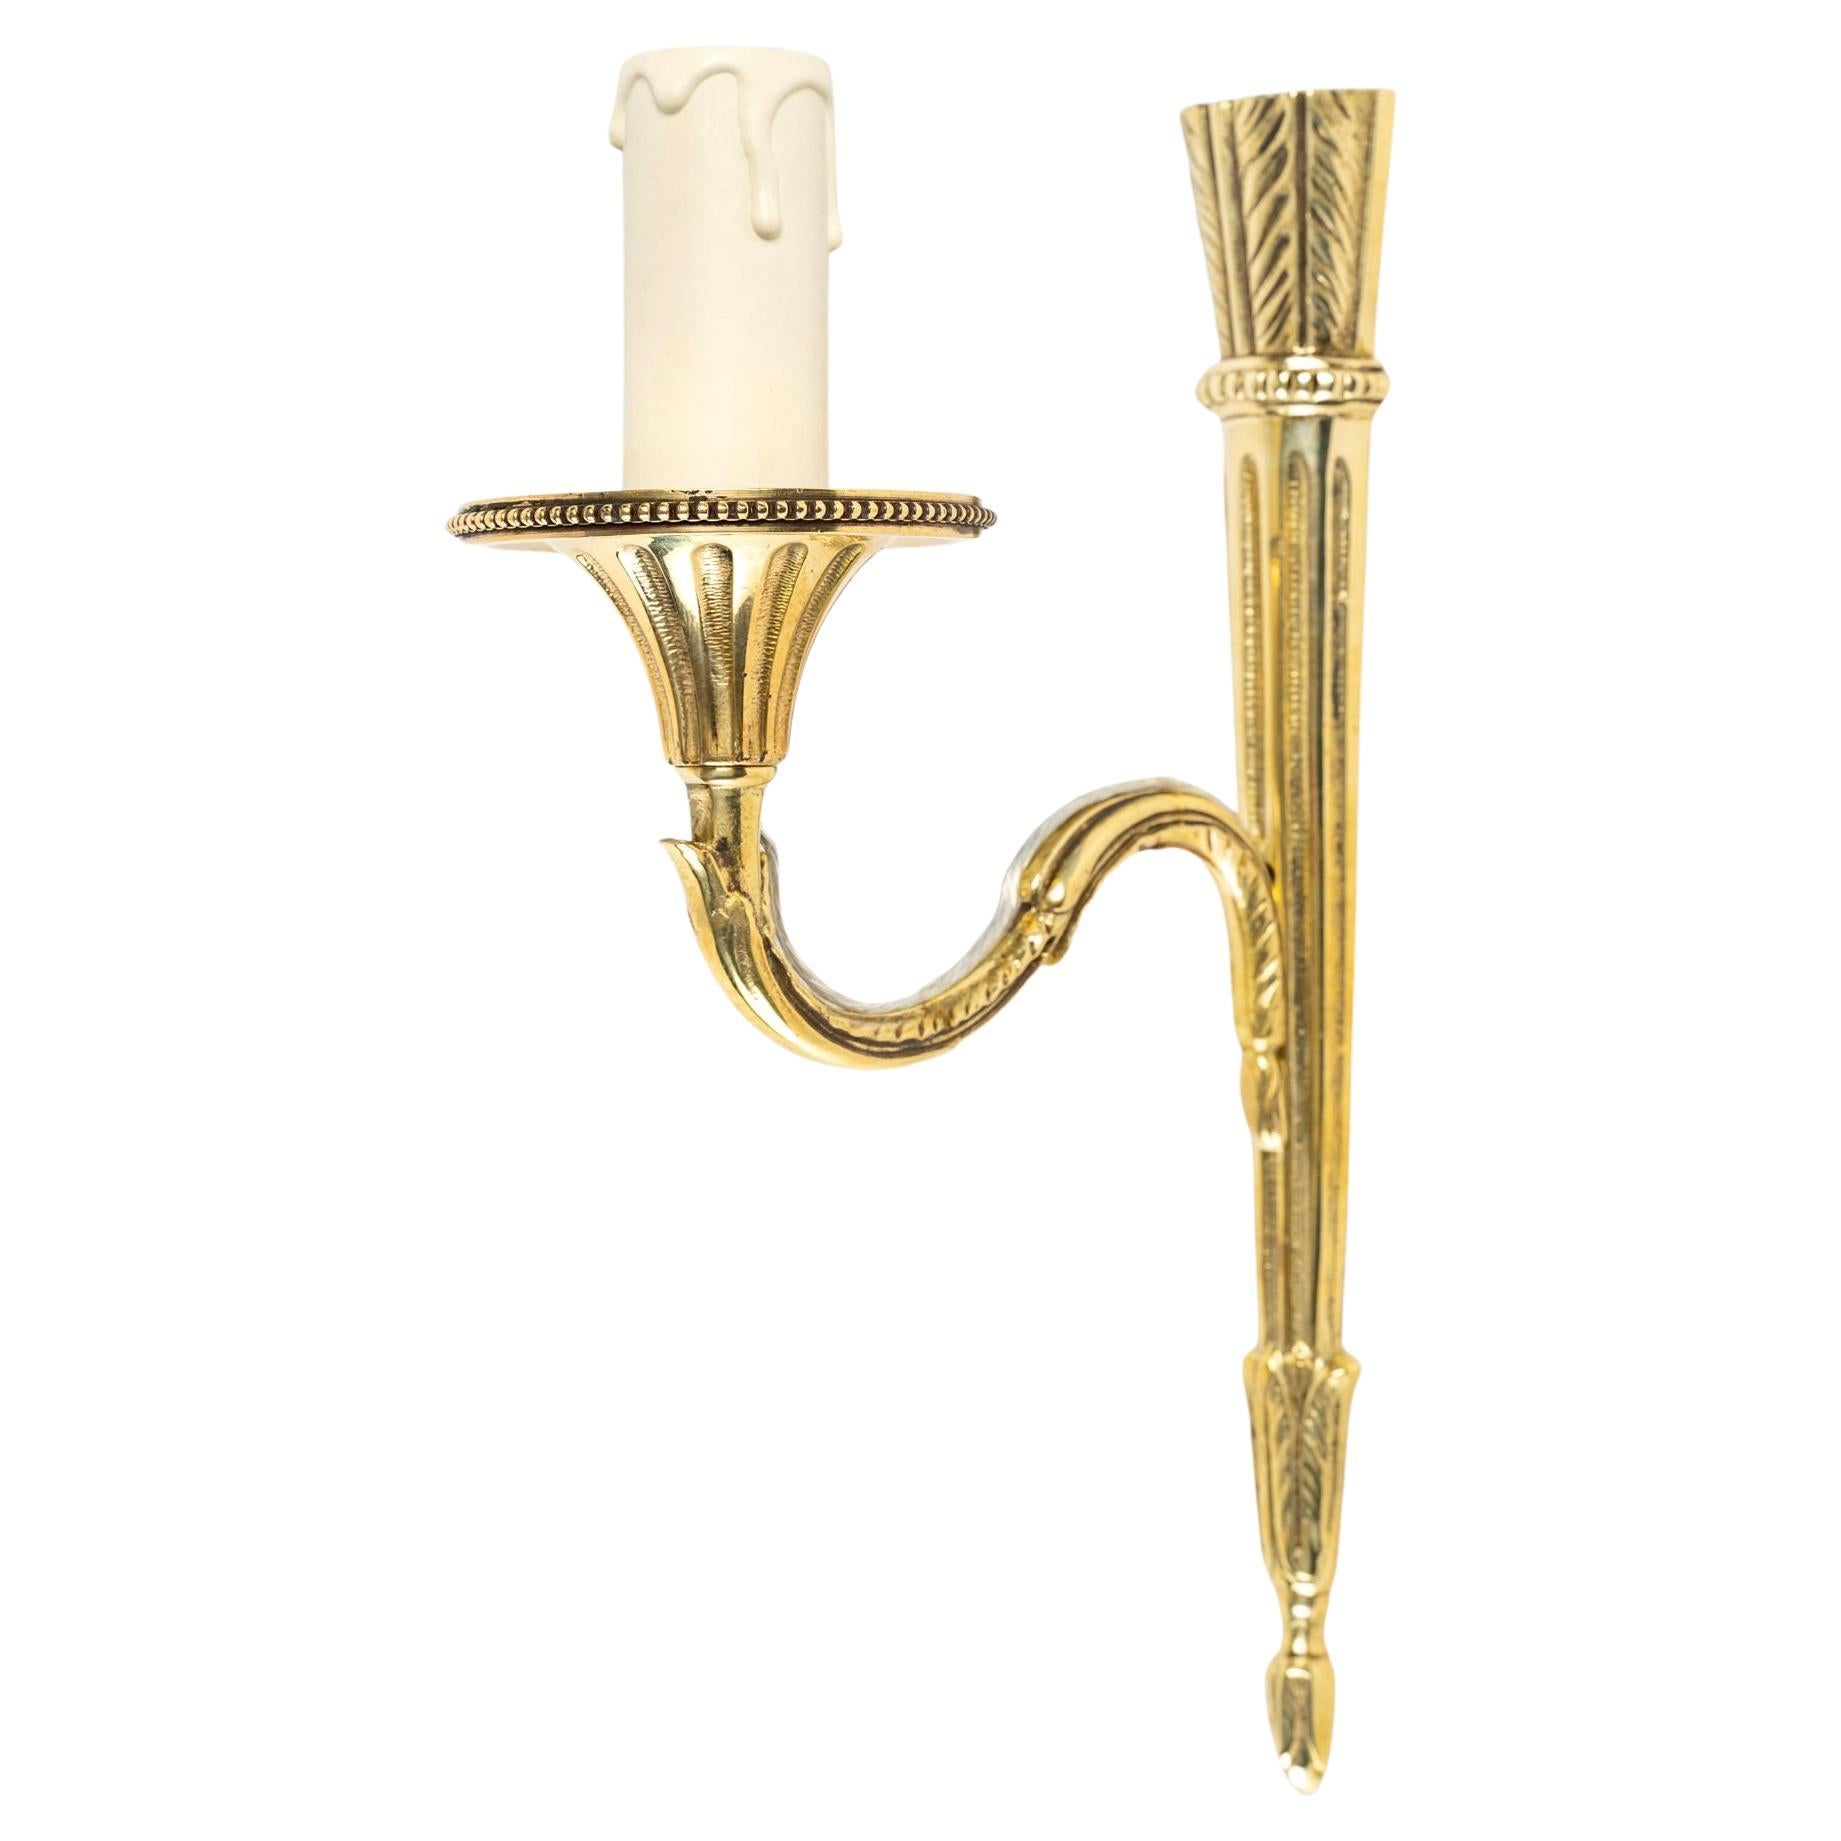 Composed of an arm in gilded bronze decorated in the upper and lower parts with neo-classical attributes in the Louis XVI style, on which is placed a rising arm of light, it is dressed with an illuminating candle and underlined by a pretty basin,